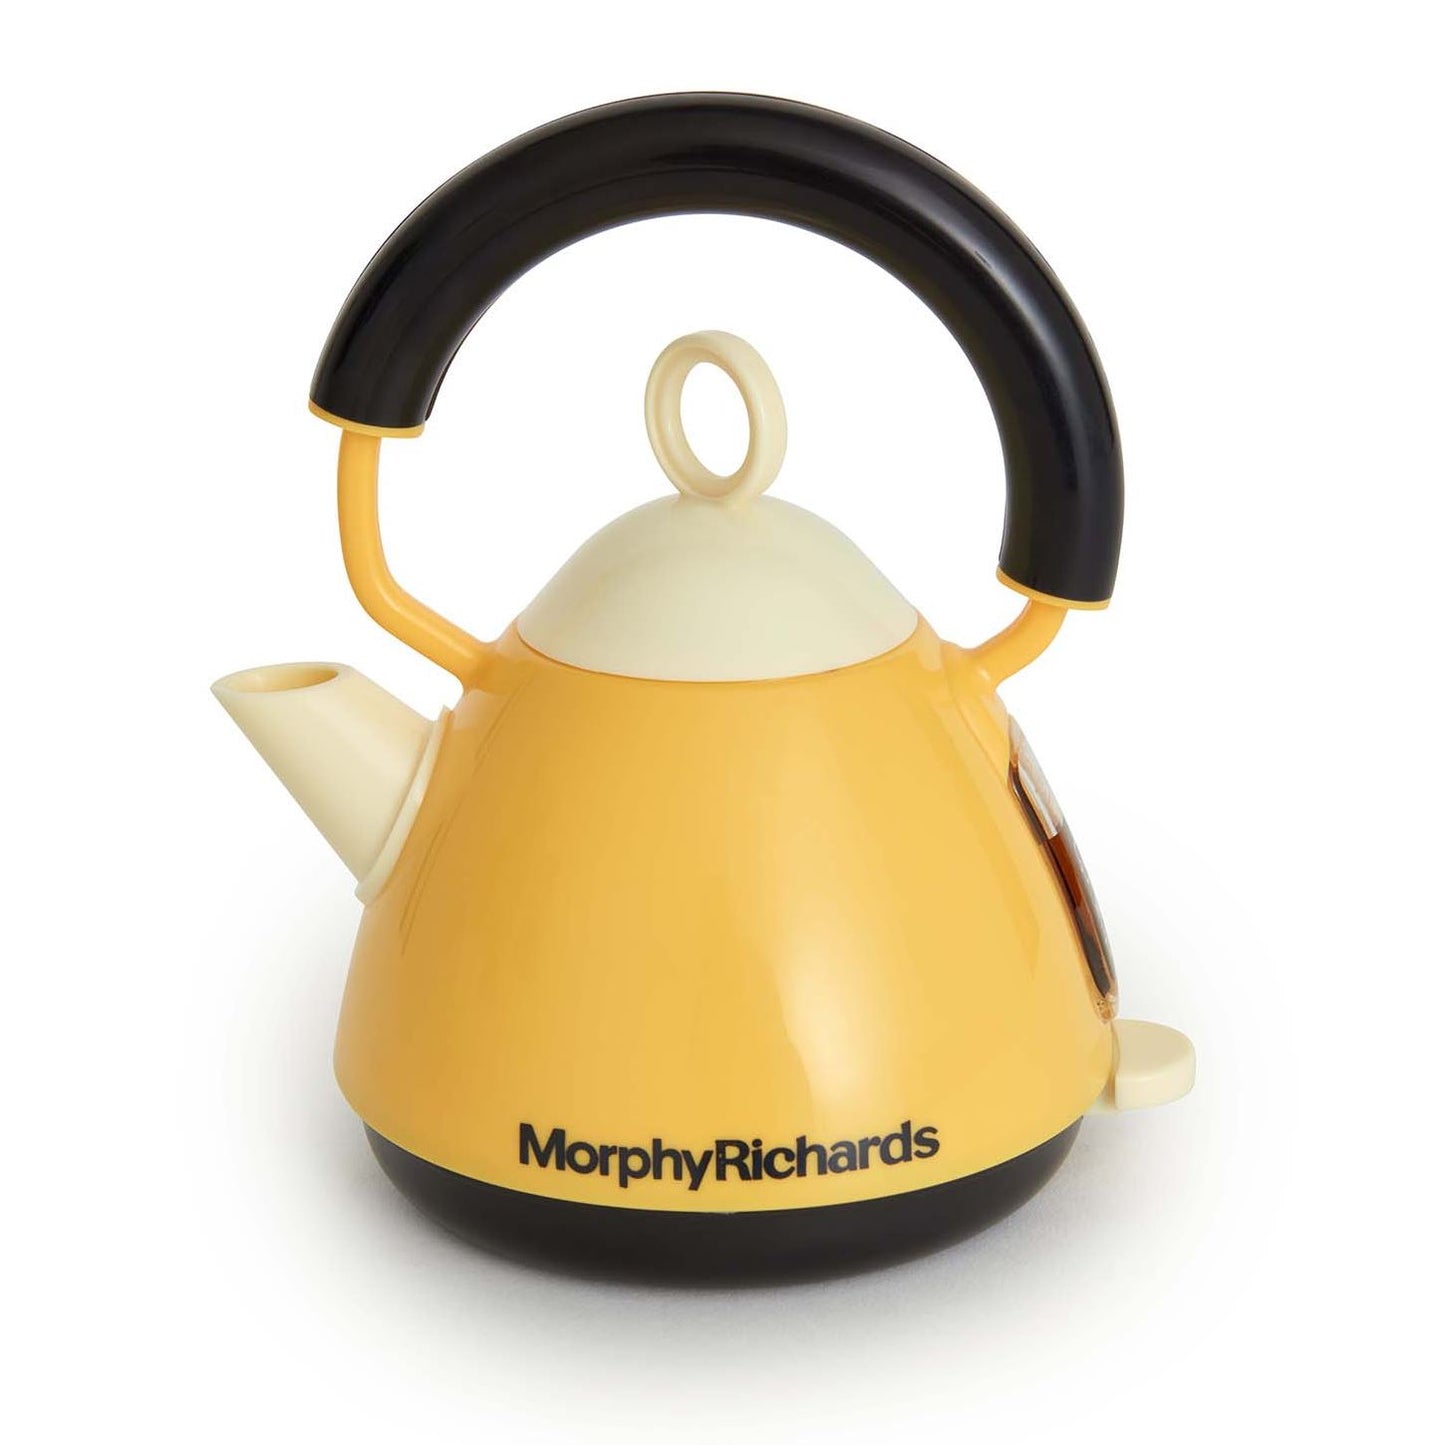 Morphy Richards Kettle and Toaster Playset